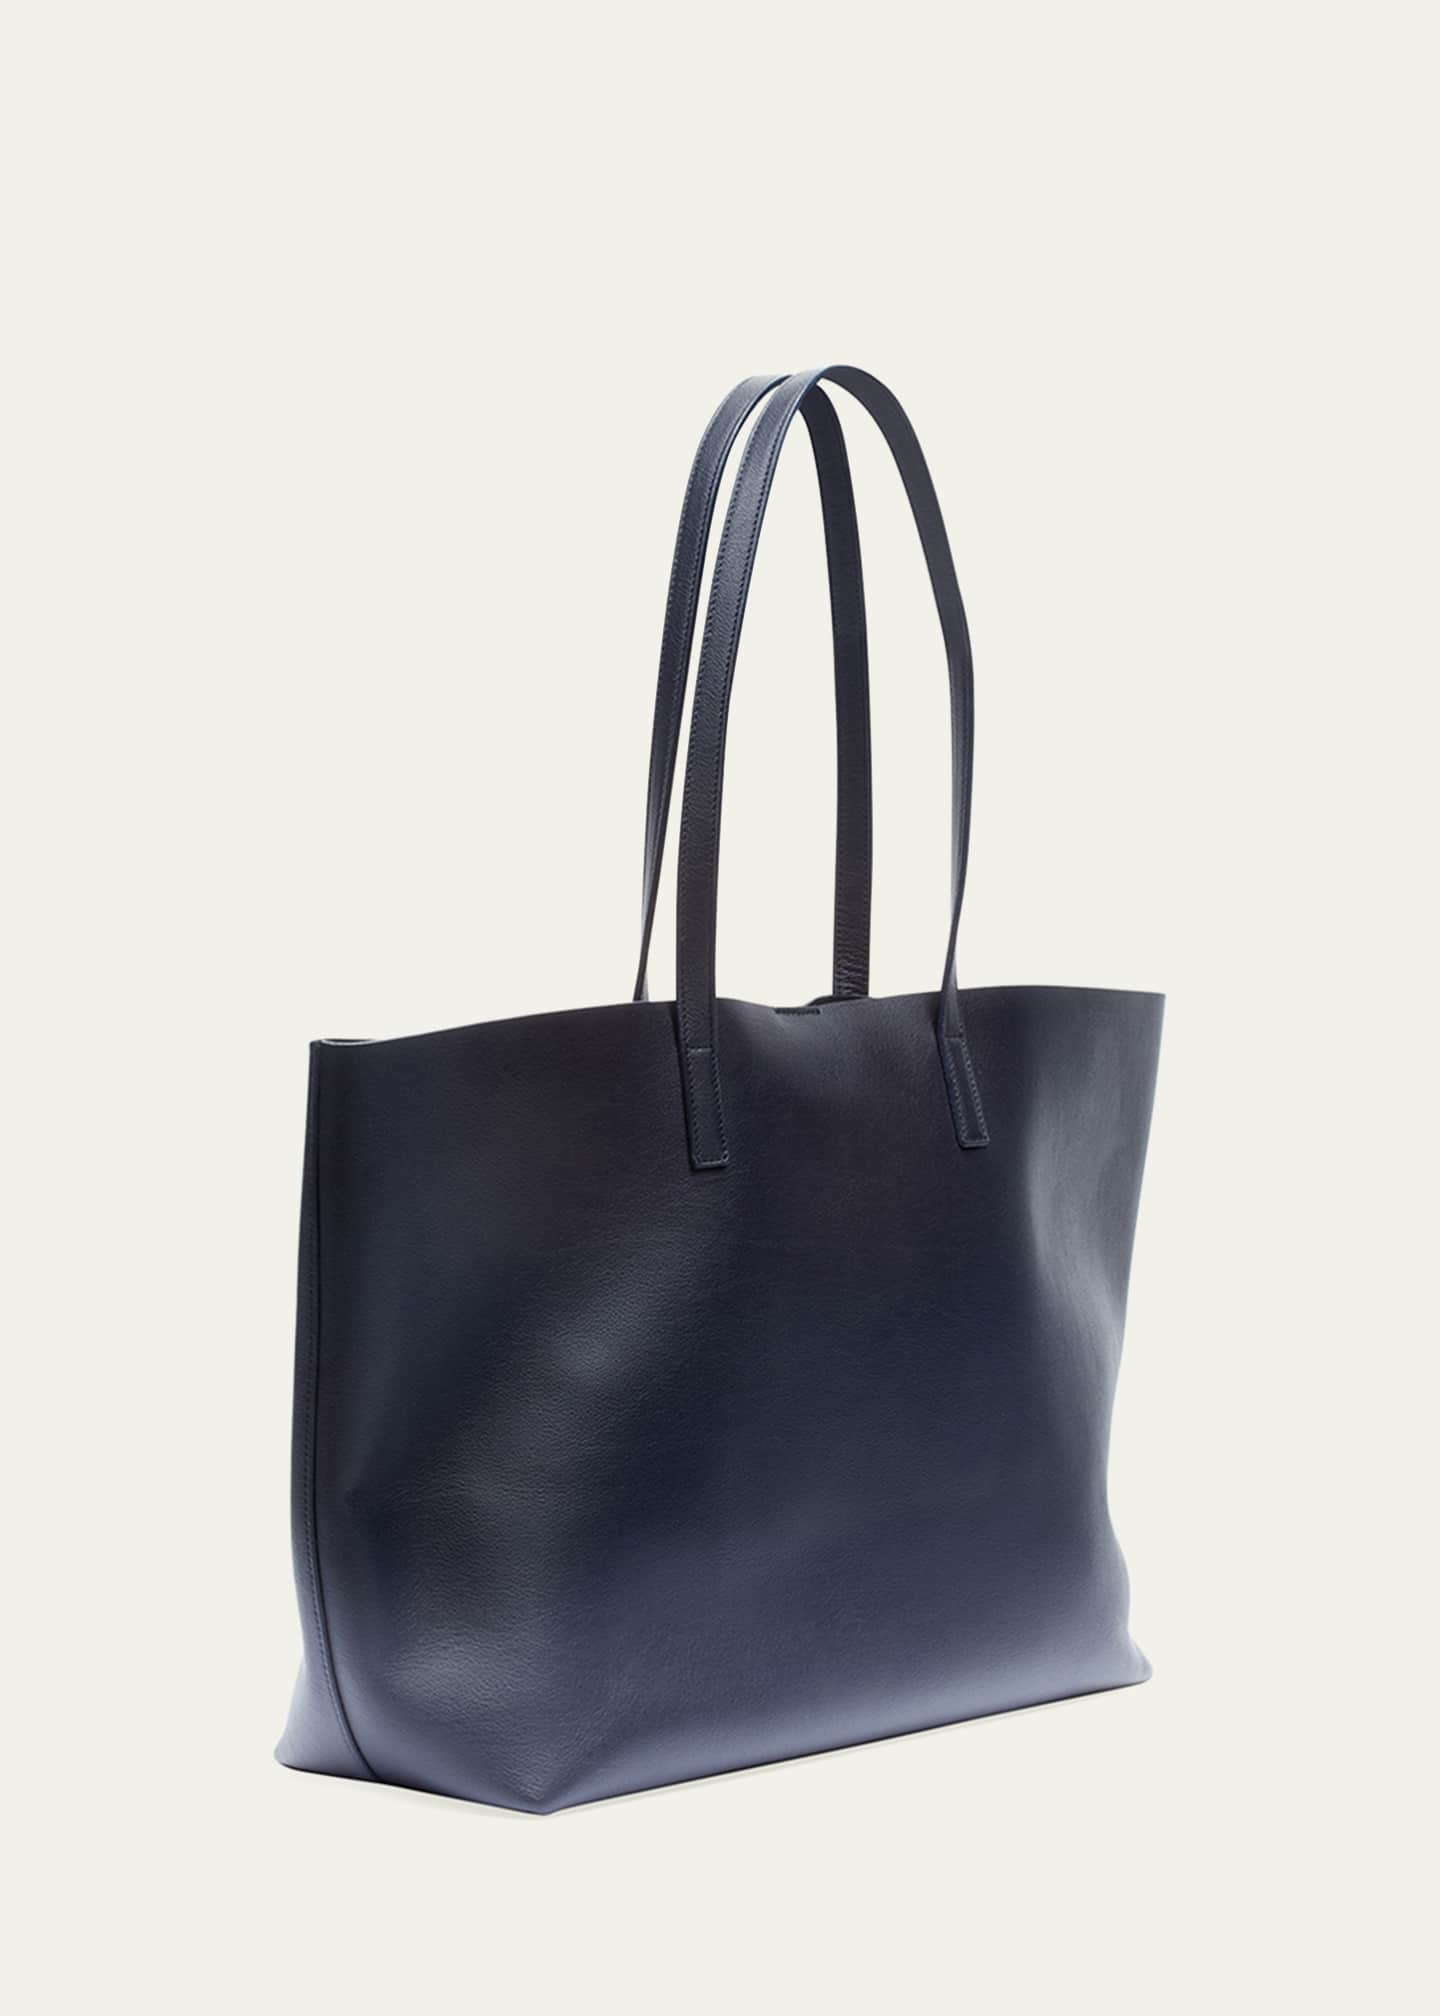 Saint Laurent Shopping Bag East-West Tote in Smooth Leather - Bergdorf ...